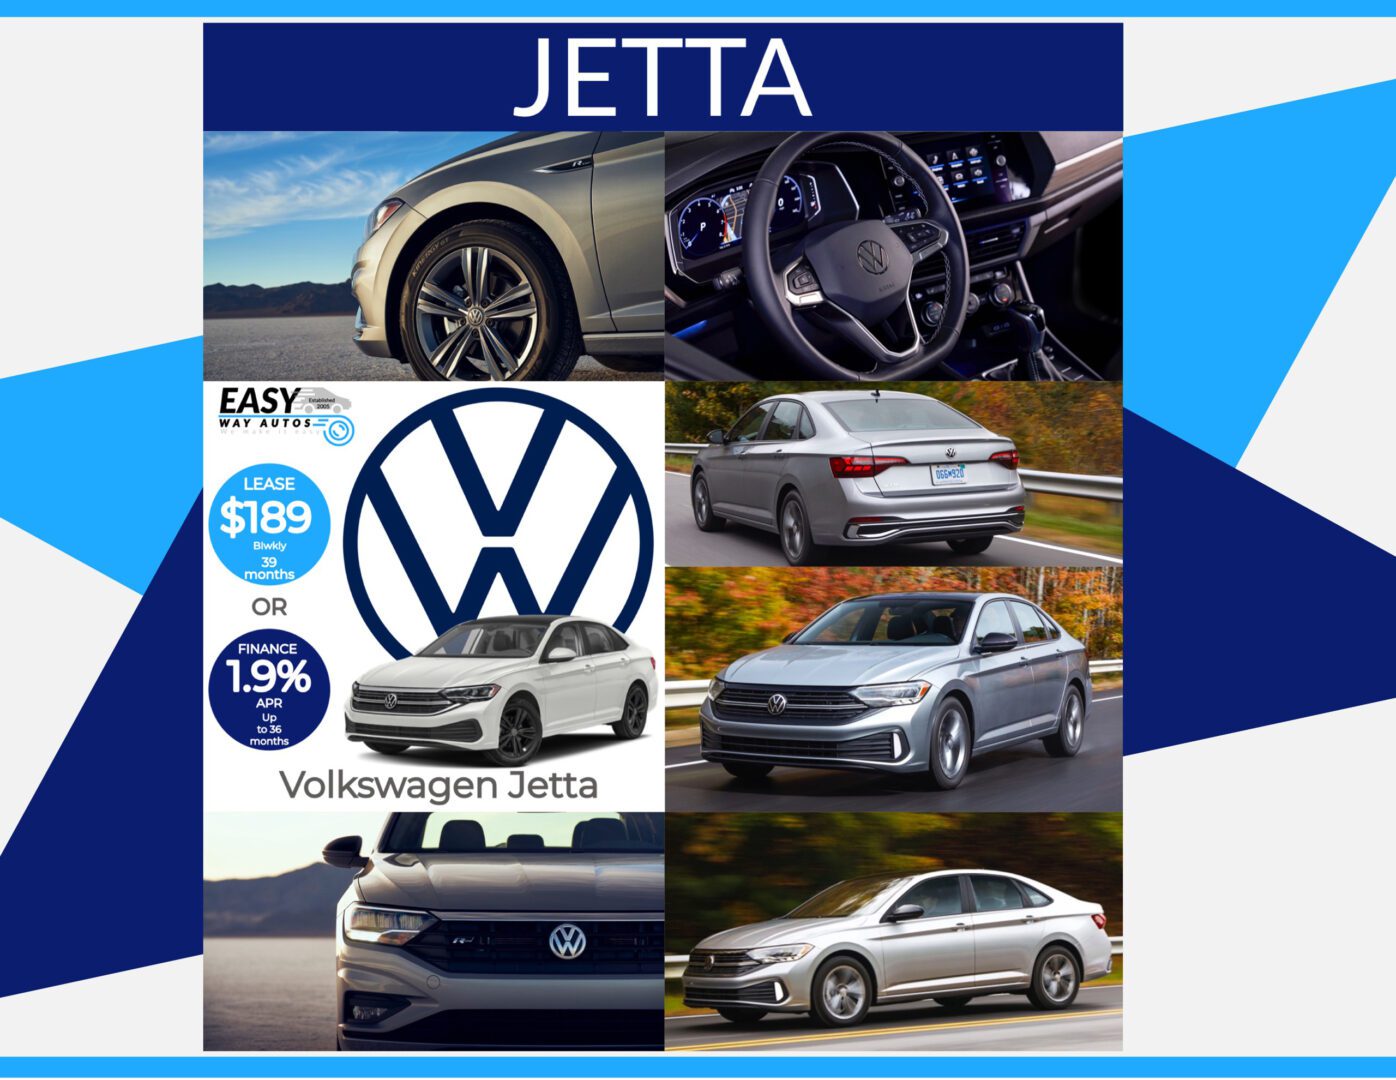 The volkswagen jetta is shown on the cover of a magazine.